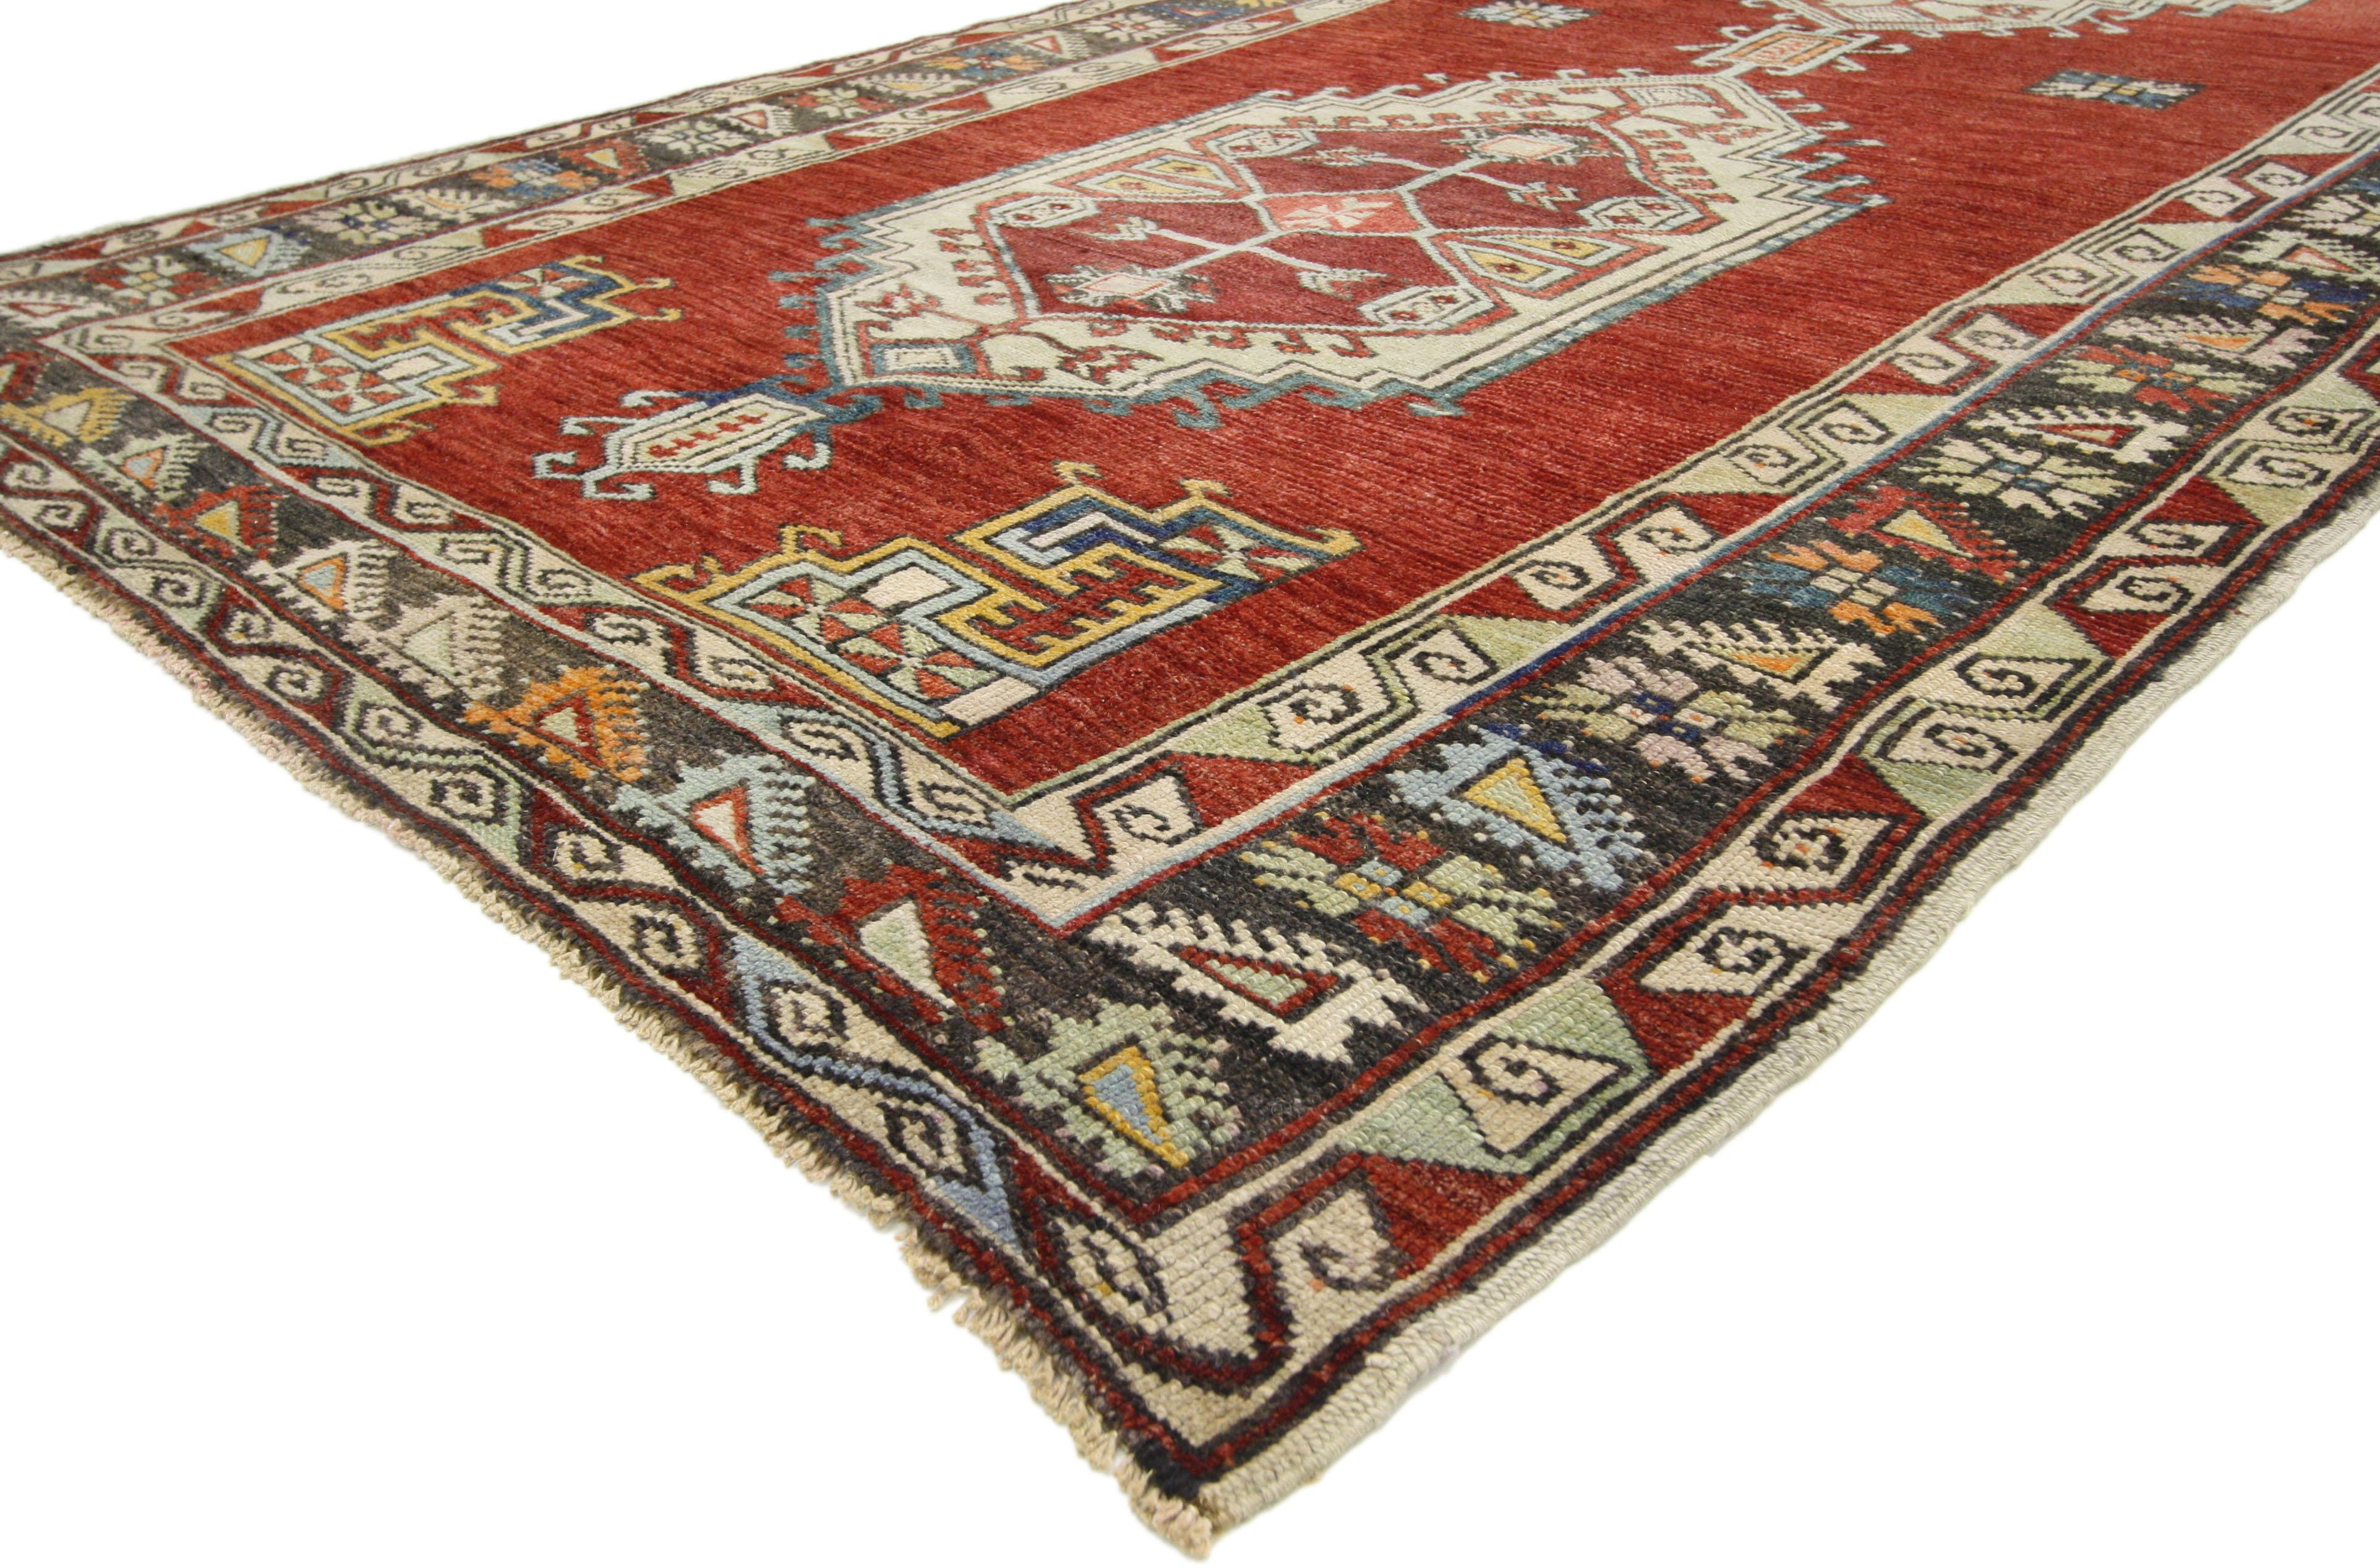 52418, vintage Turkish Oushak Gallery rug, wide hallway runner. This hand knotted wool vintage Turkish Oushak Gallery rug features two hexagonal medallions with latch hook edges and finials against a red abrash backdrop. Angular geometric spandrels